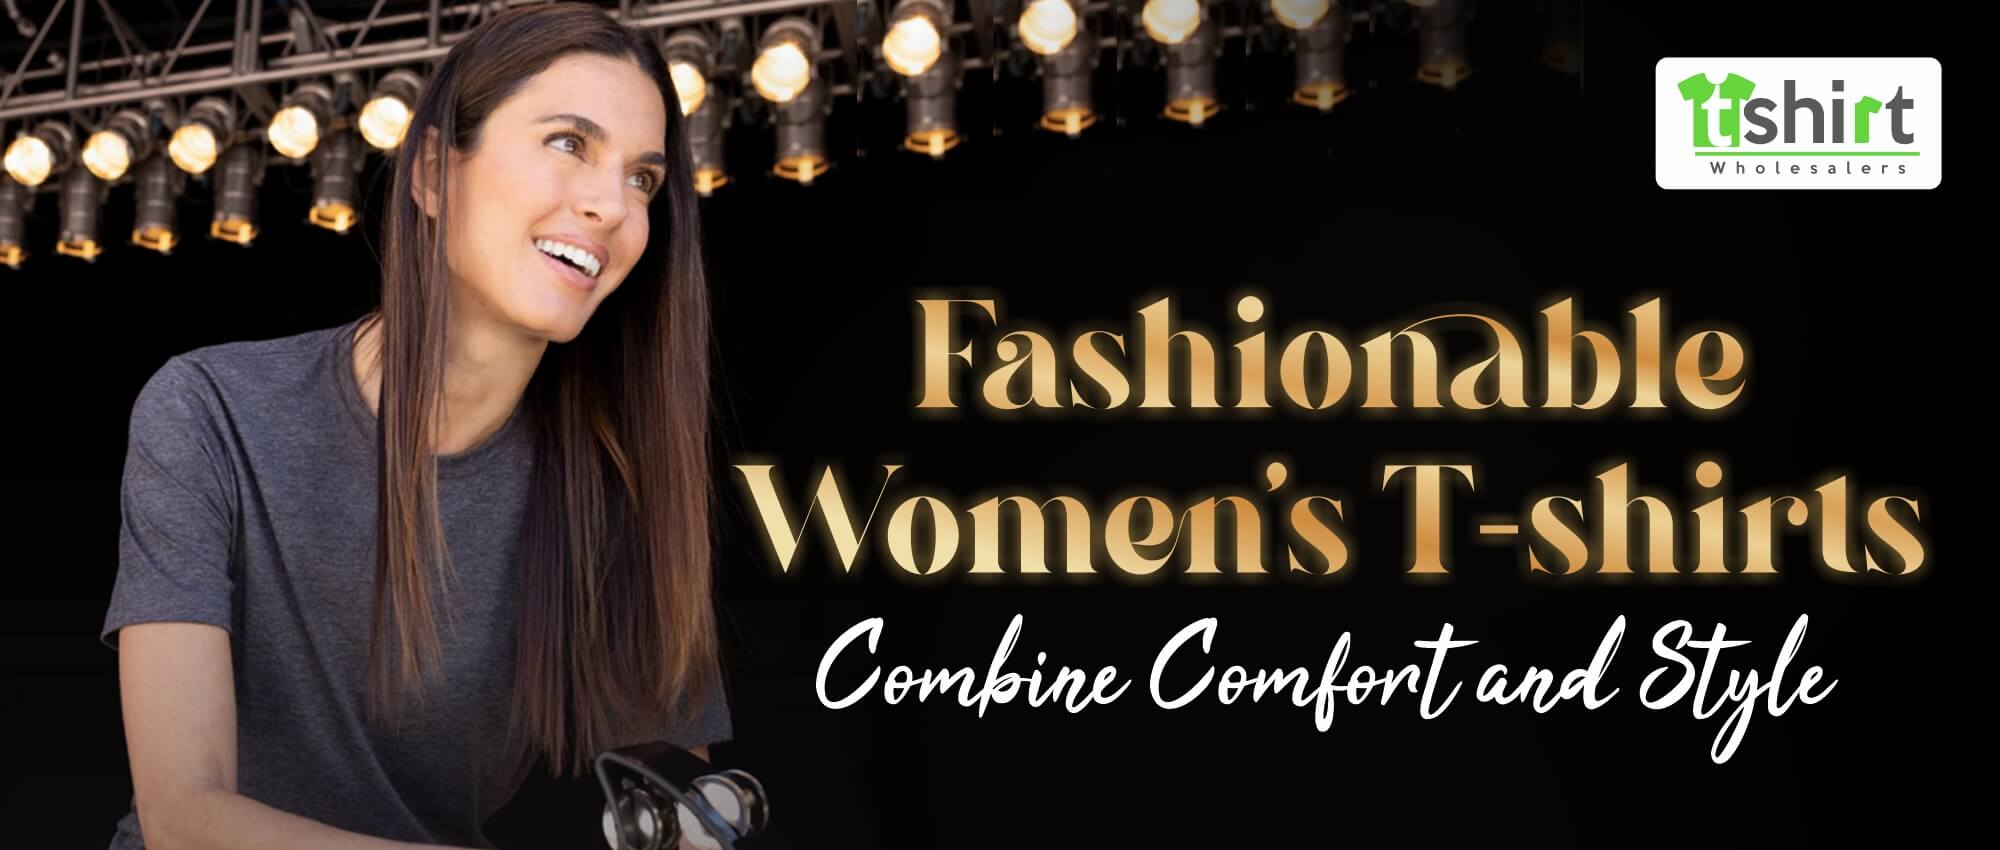 FASHIONABLE WOMEN'S T-SHIRTS COMBINE COMFORT AND STYLE